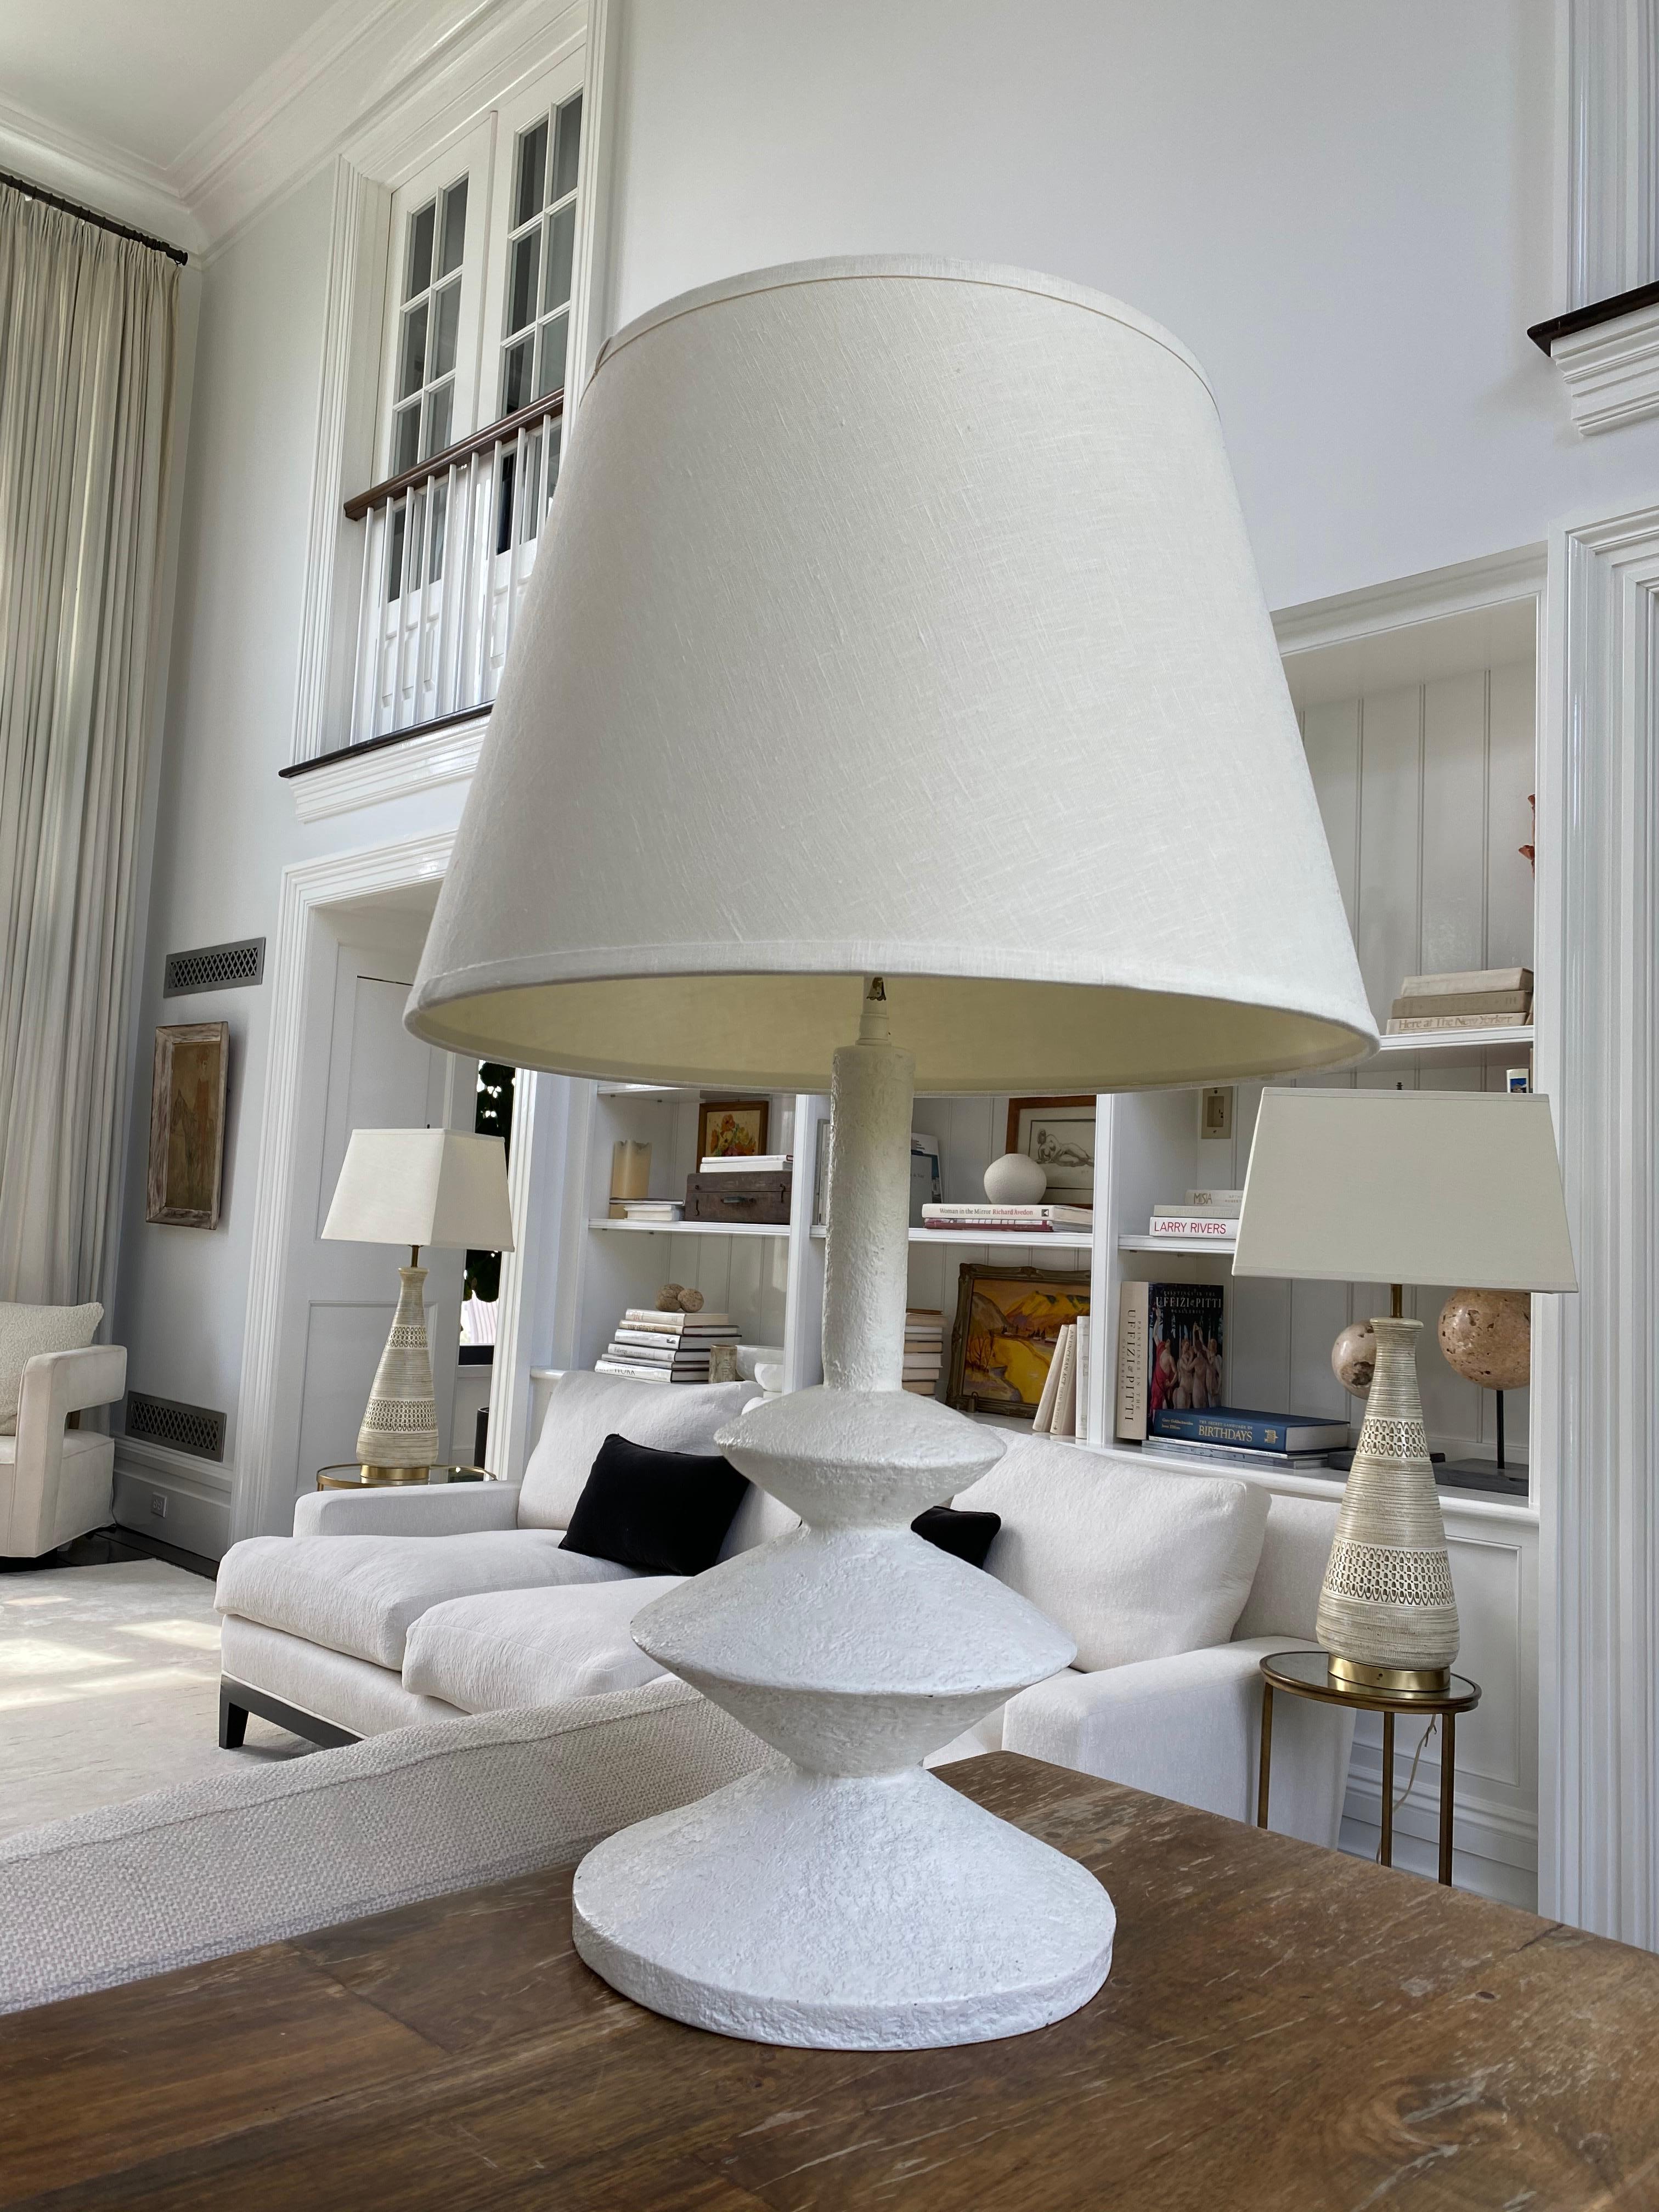 Plaster triple disc lamp with linen shade.

30 x 10 inches, without shade. Shade can be included upon request and additional shipping.

Yves Saint Laurent, fashion designer and substantial art & antiquities collector, was enamored by a lamp he